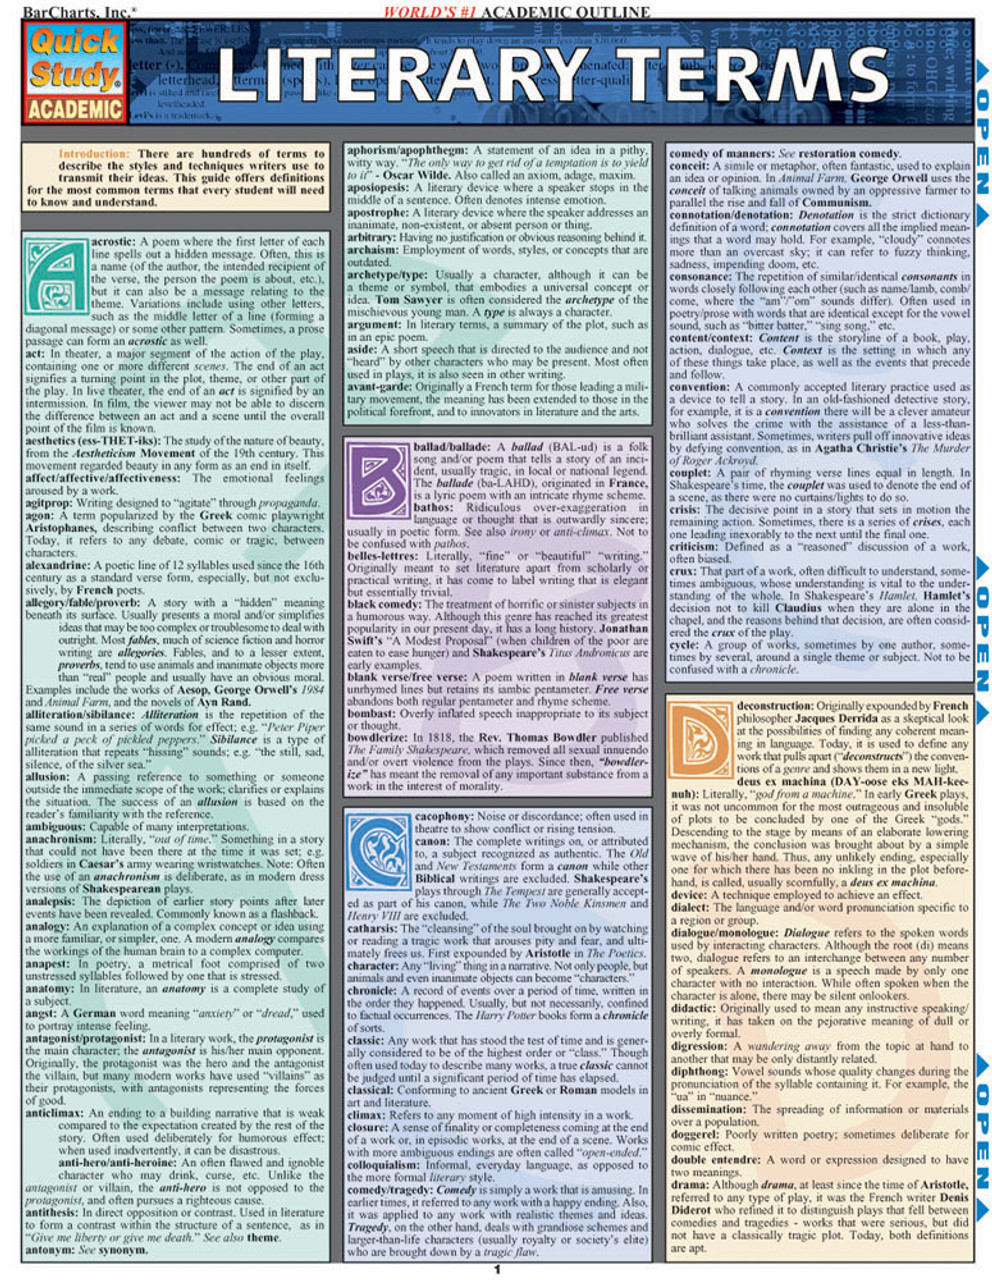 Quick Study Academic Outline: Essays & Term Papers (4-Page Laminated Study  Chart)